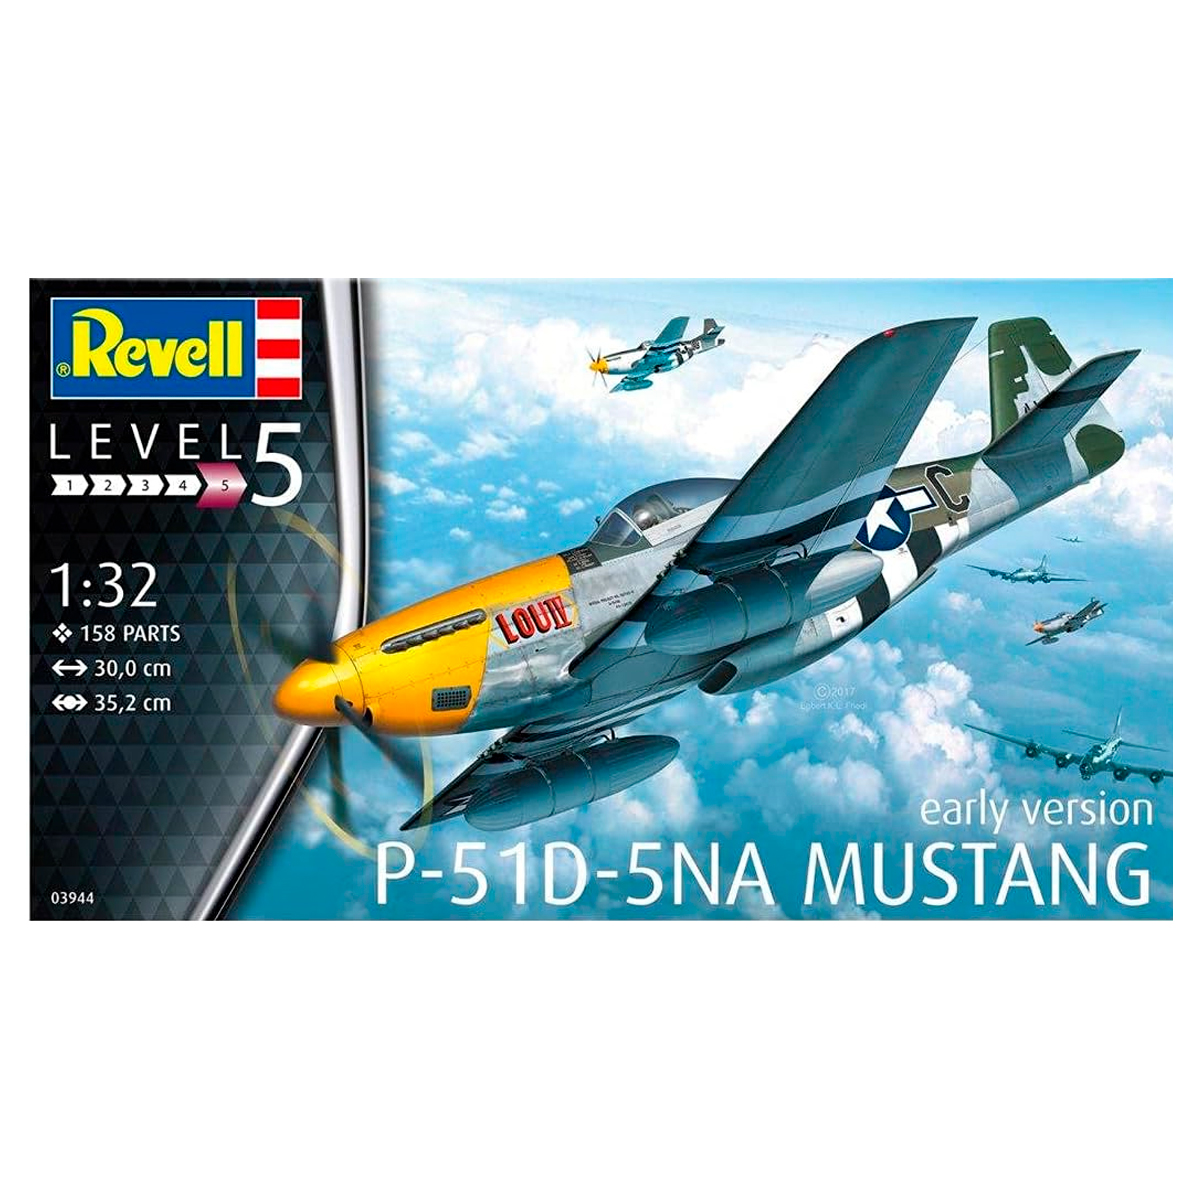 P-51D-5NA Mustang (early version) 1/32